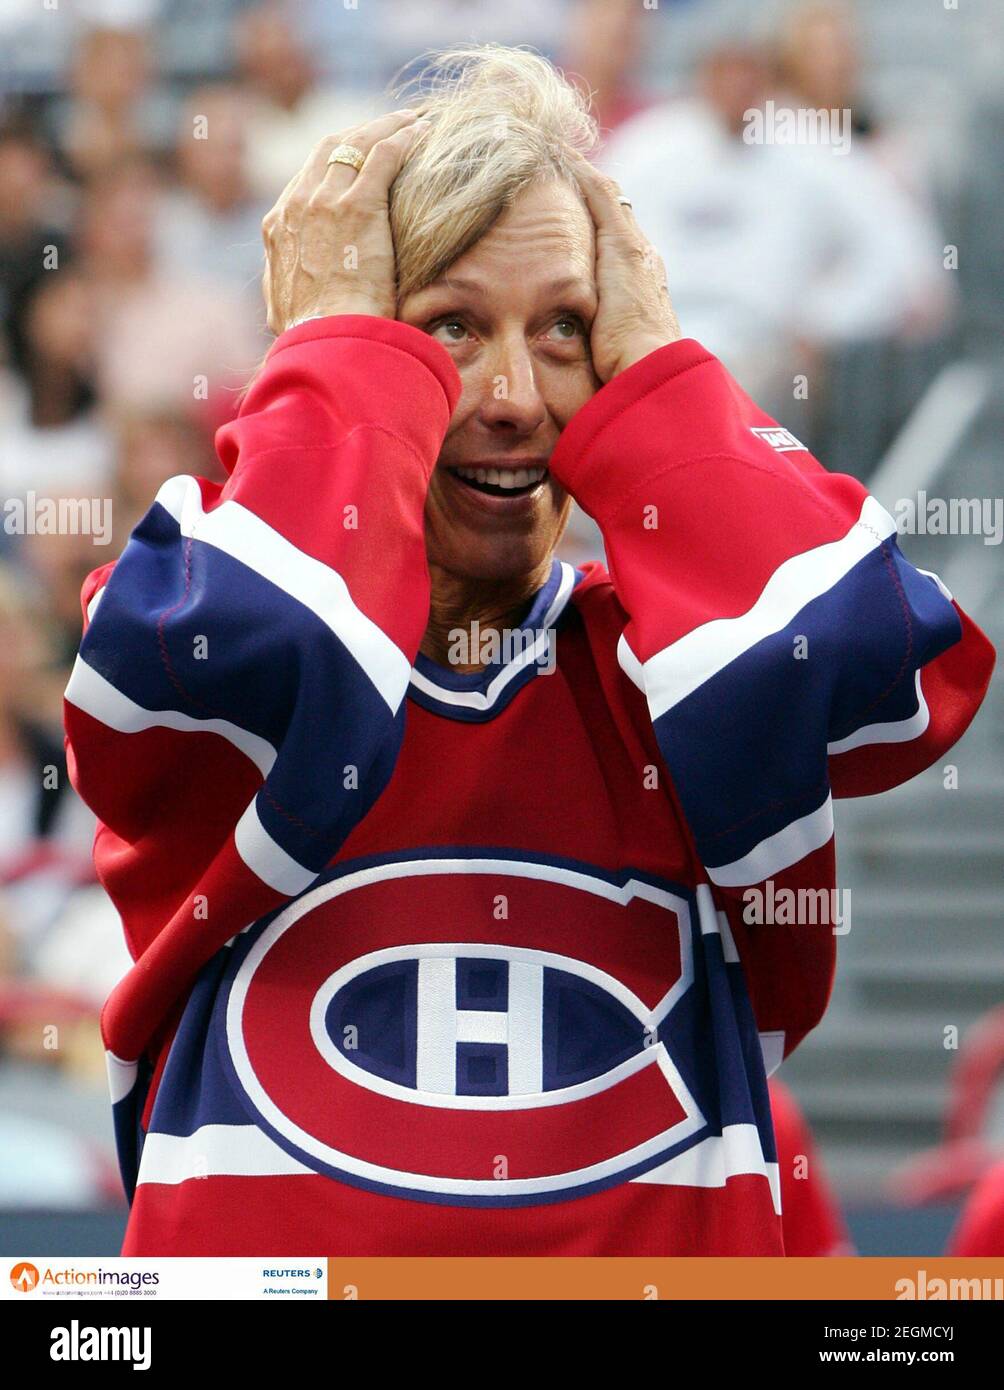 Tennis - Rogers Cup, Sony Ericsson WTA Tour - Montreal, Canada - 15/8/06  Tennis player Martina Navratilova, wearing a Montreal Canadiens hockey jersey, reacts as she is honoured during a ceremony at the Rogers Cup, Sony Ericsson WTA Tour in Montreal  Mandatory Credit: Action Images / Chris Wattie  Livepic Stock Photo